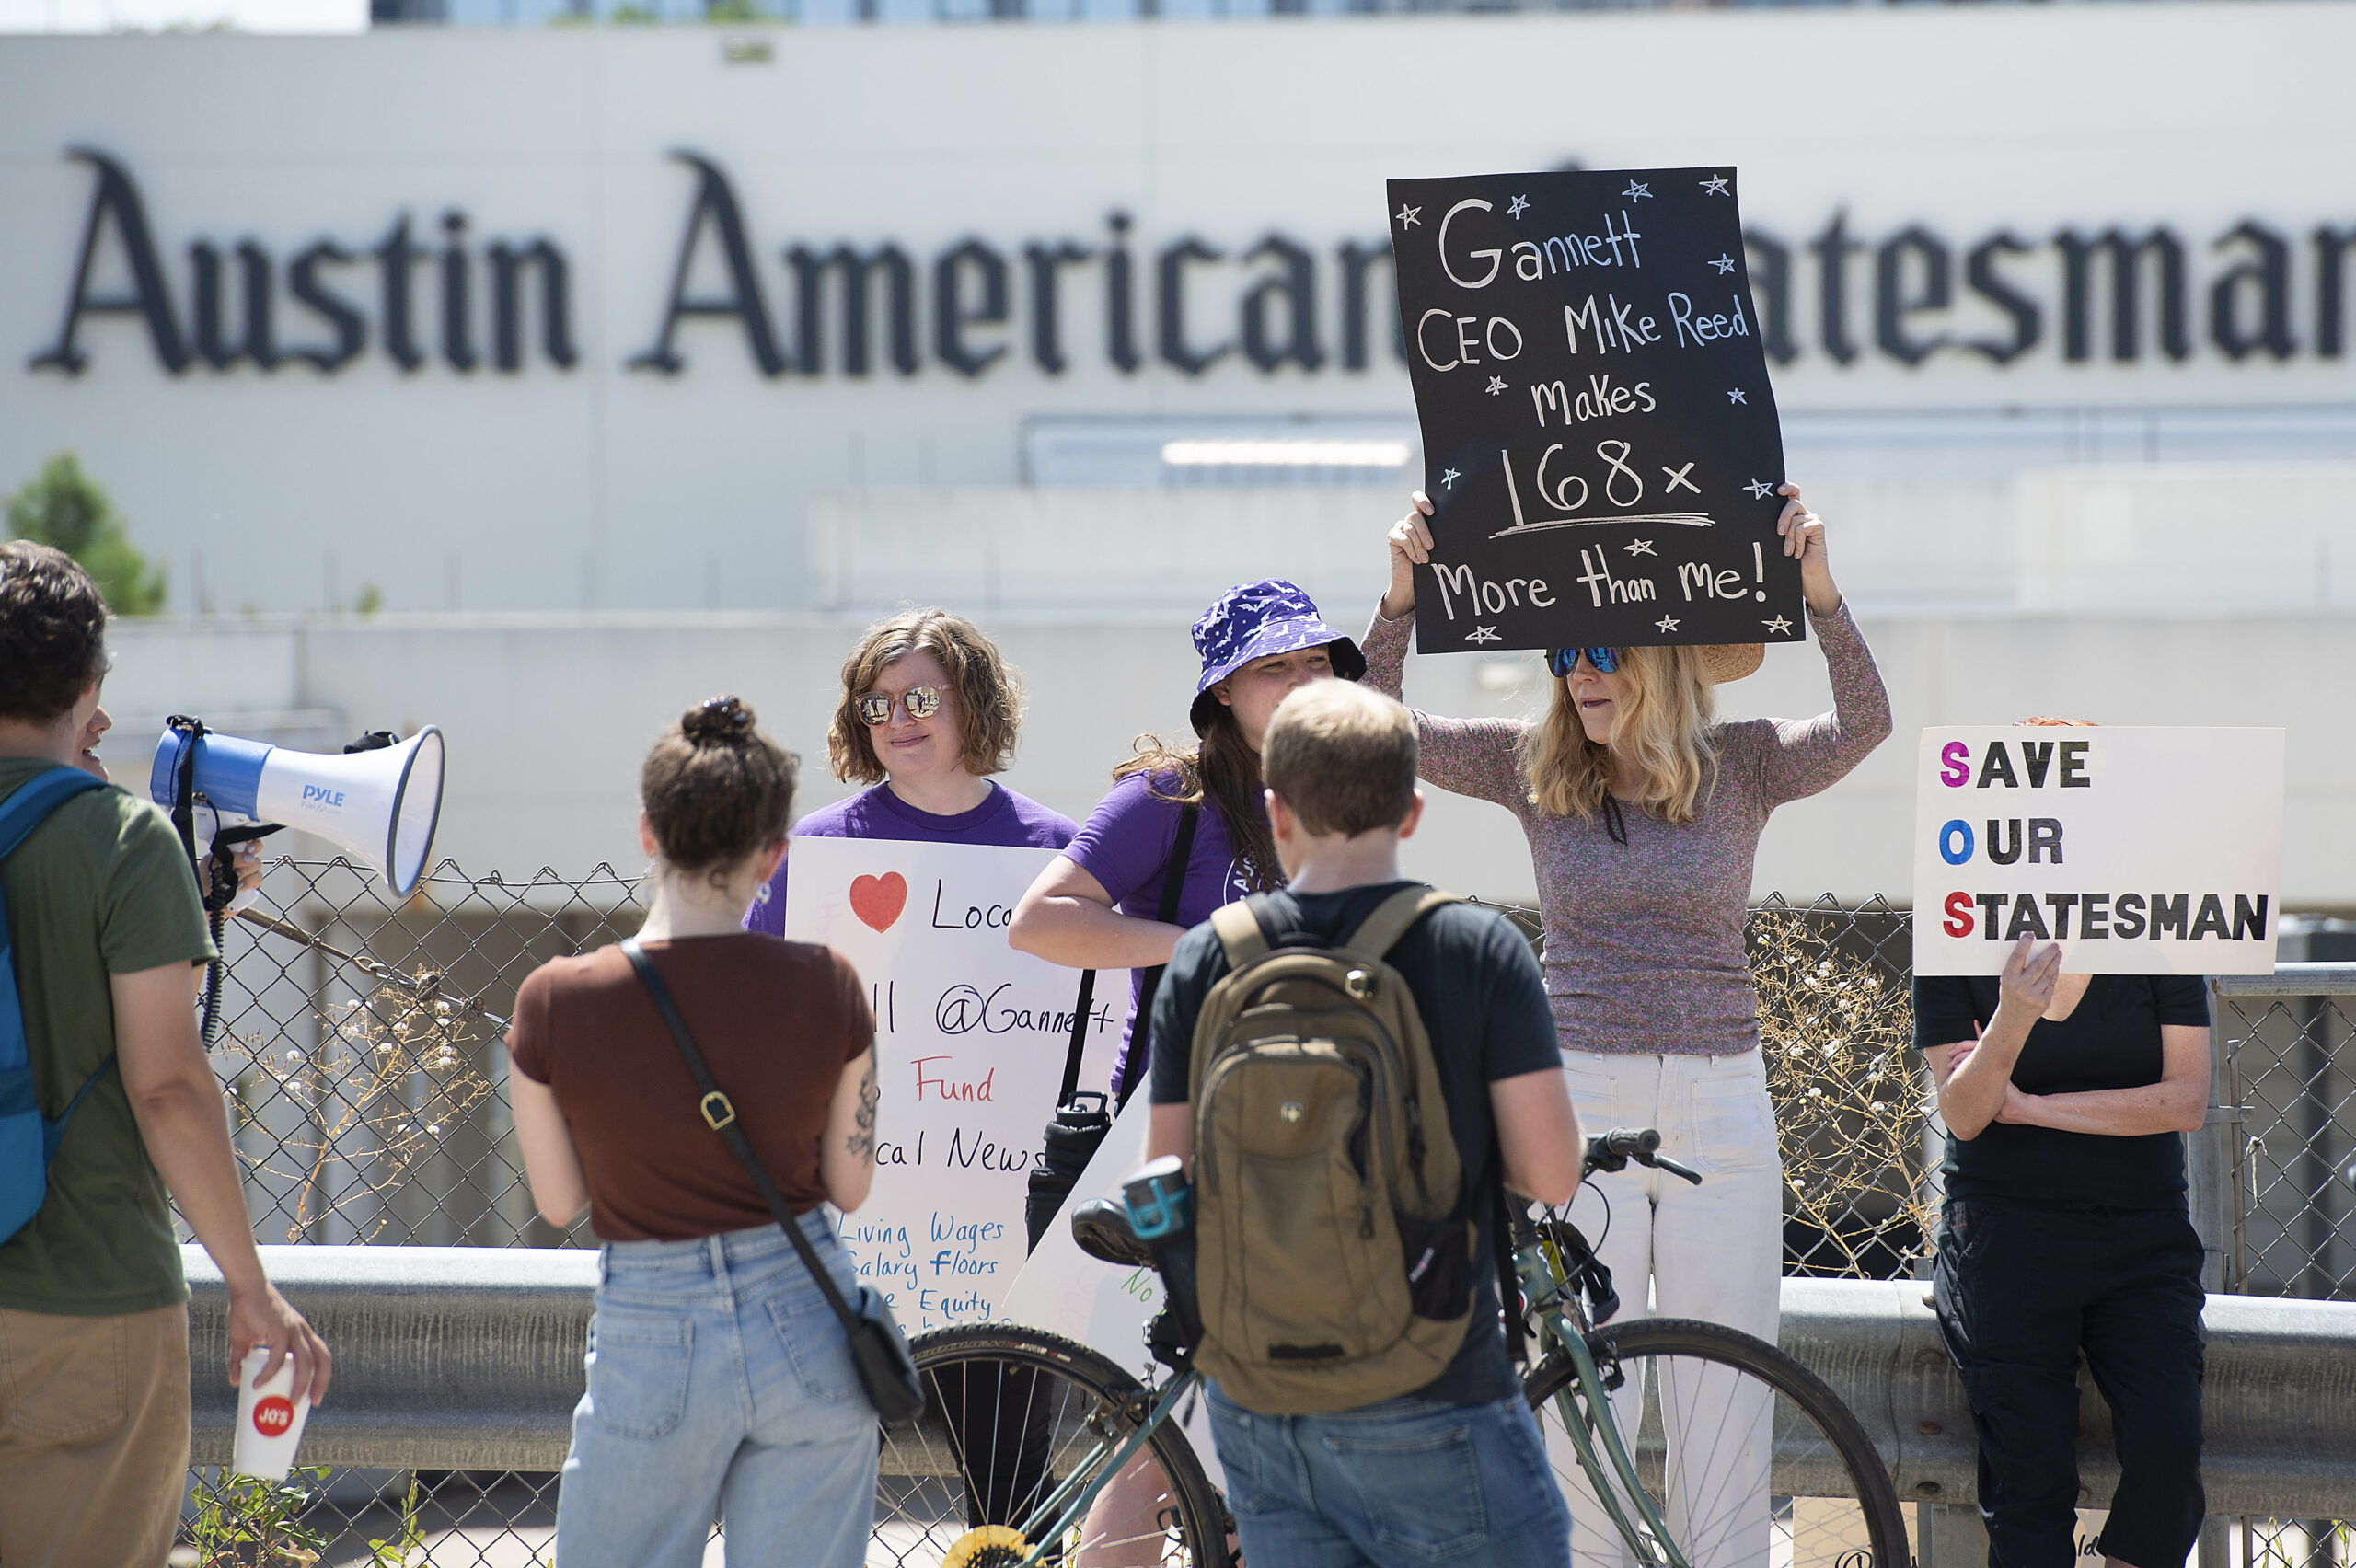 Union journalists, employees, editors, photographers and page designers strike at the Austin American-Statesman as part of an effort to secure a $60,000 wage floor. The strike is part of a nationwide action by journalists at Gannett, which owns the 152-year-old Austin paper